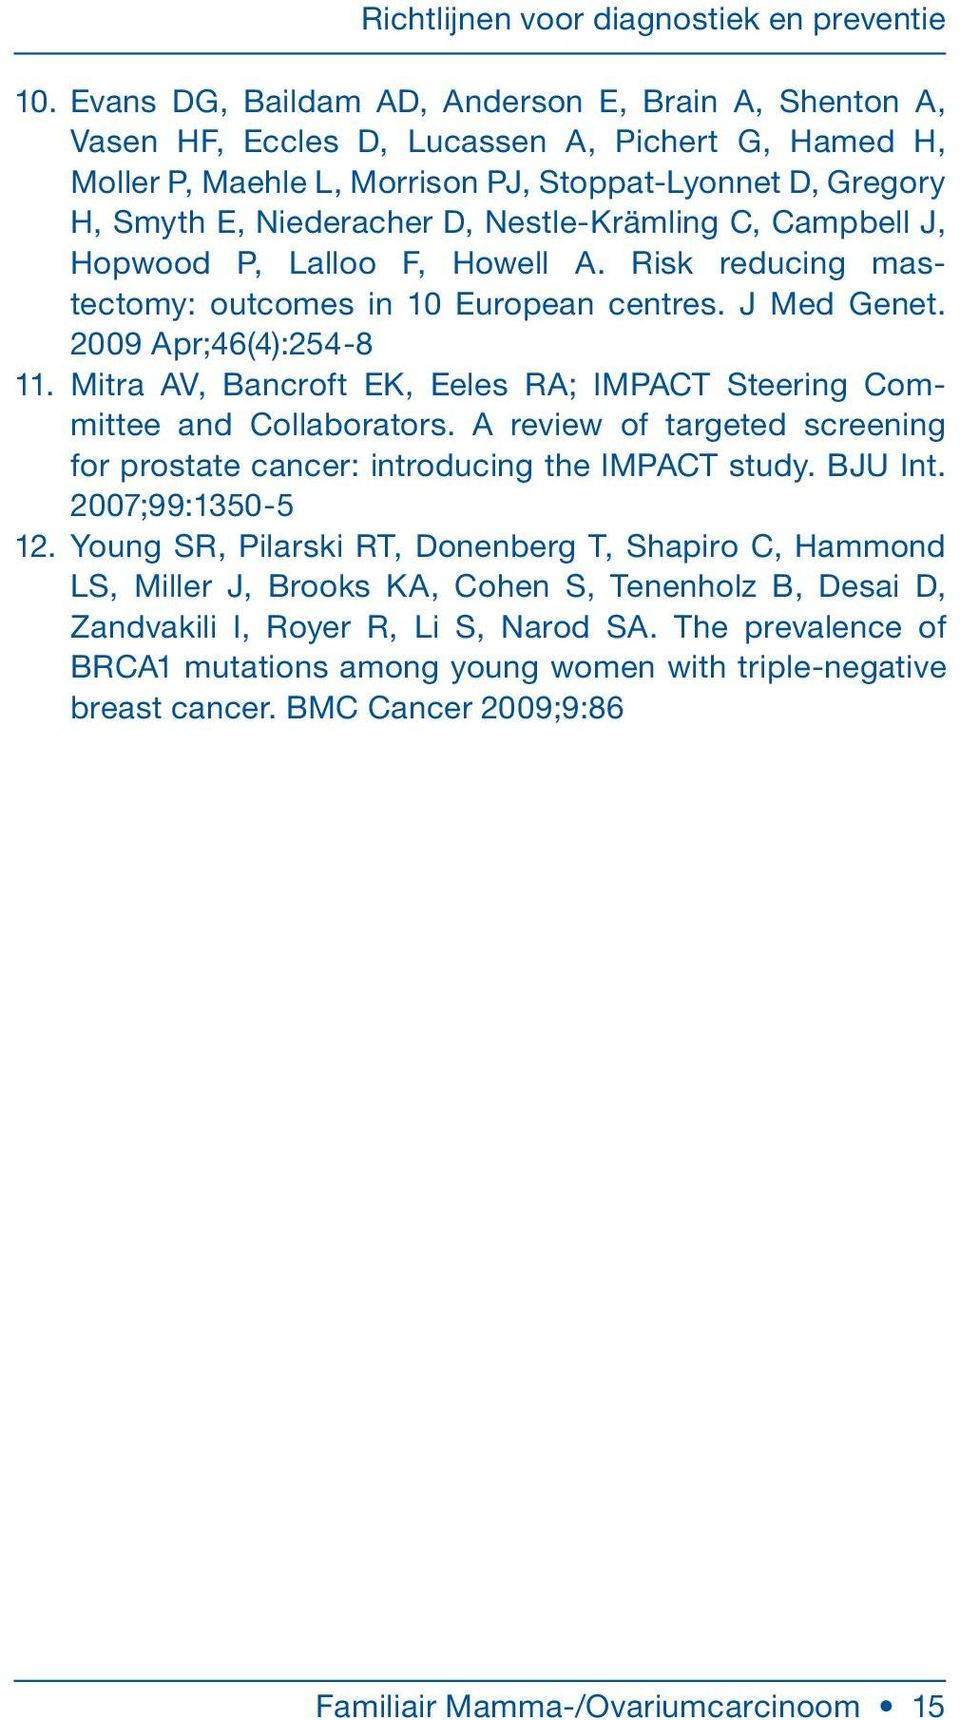 Mitra AV, Bancroft EK, Eeles RA; IMPACT Steering Committee and Collaborators. A review of targeted screening for prostate cancer: introducing the IMPACT study. BJU Int. 2007;99:1350-5 12.